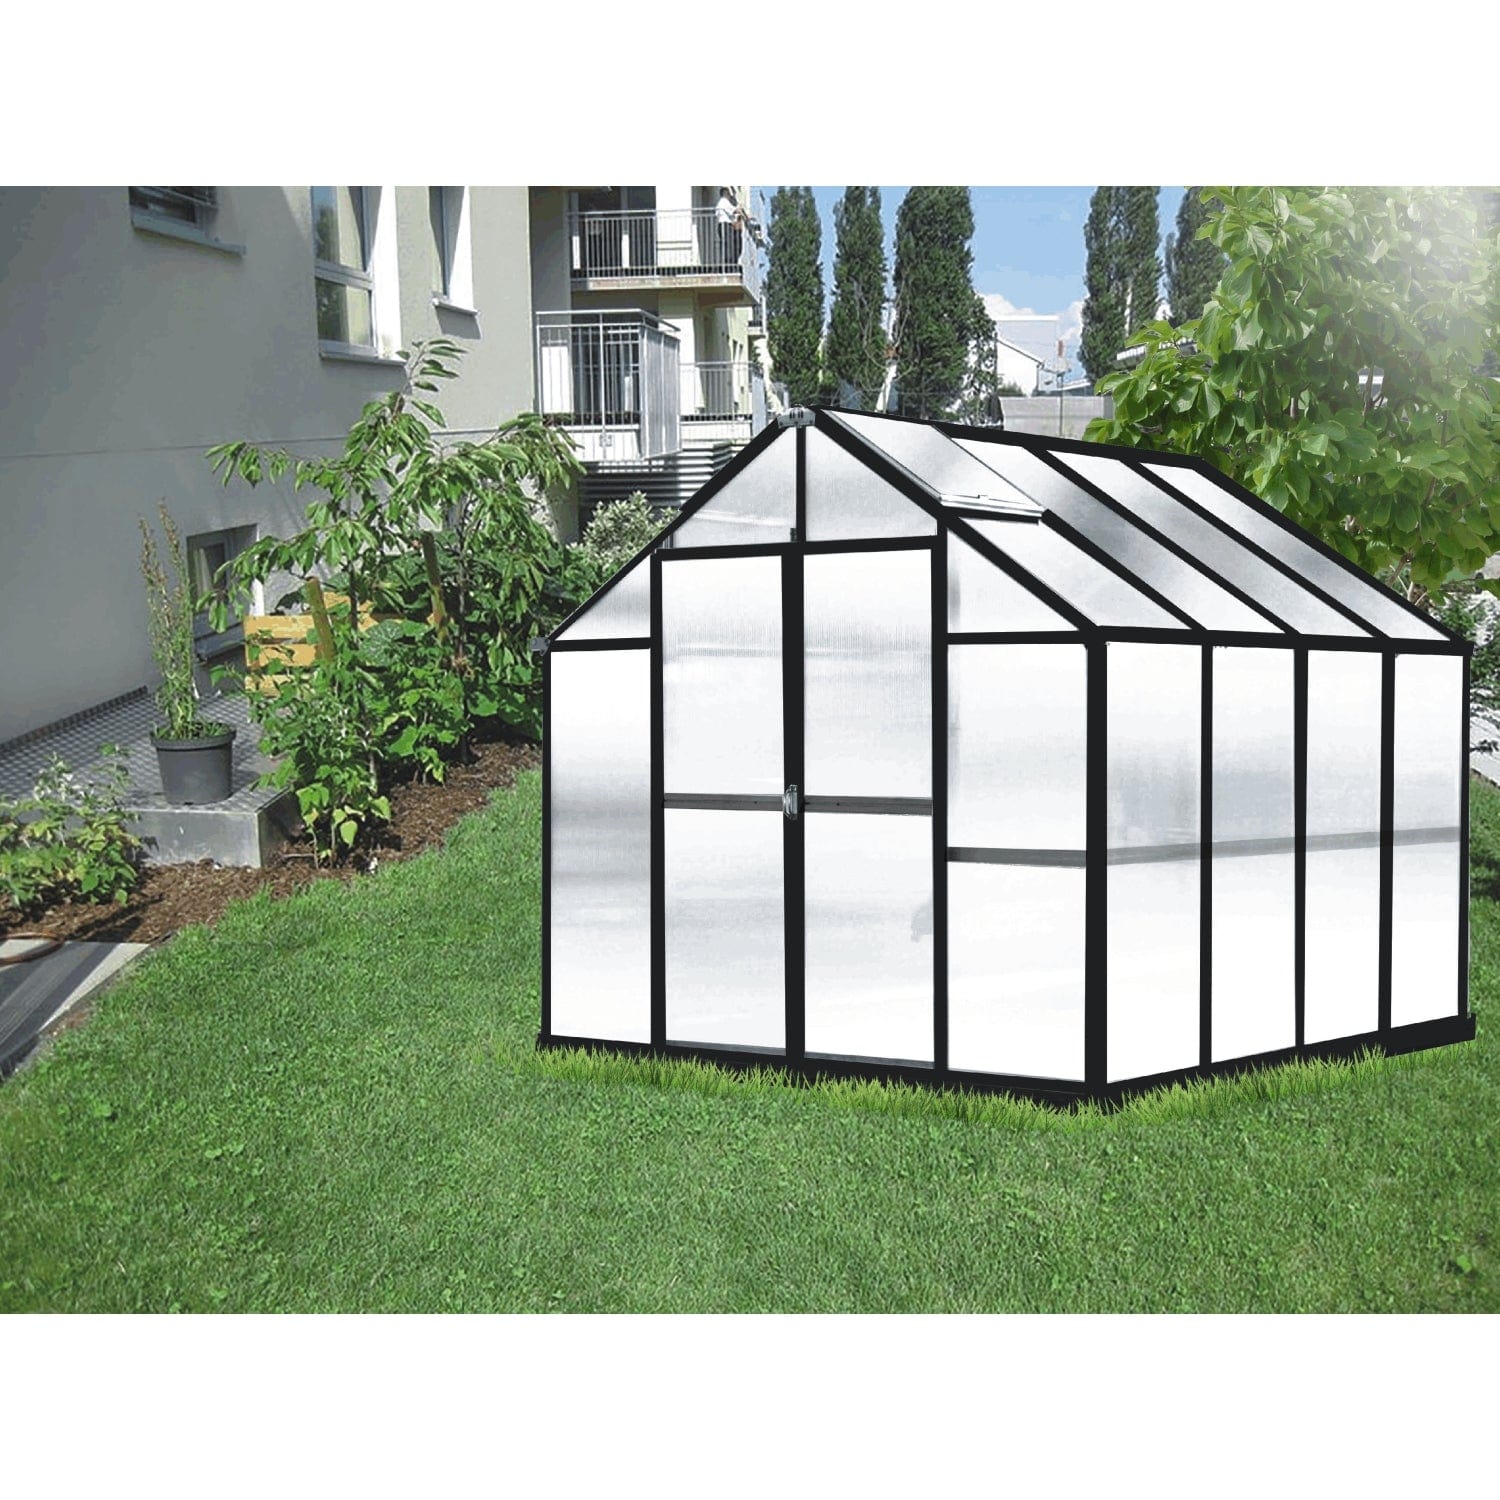 Riverstone Industries Deluxe Greenhouse Kit Riverstone | MONT Growers Edition Greenhouse - Black Finish